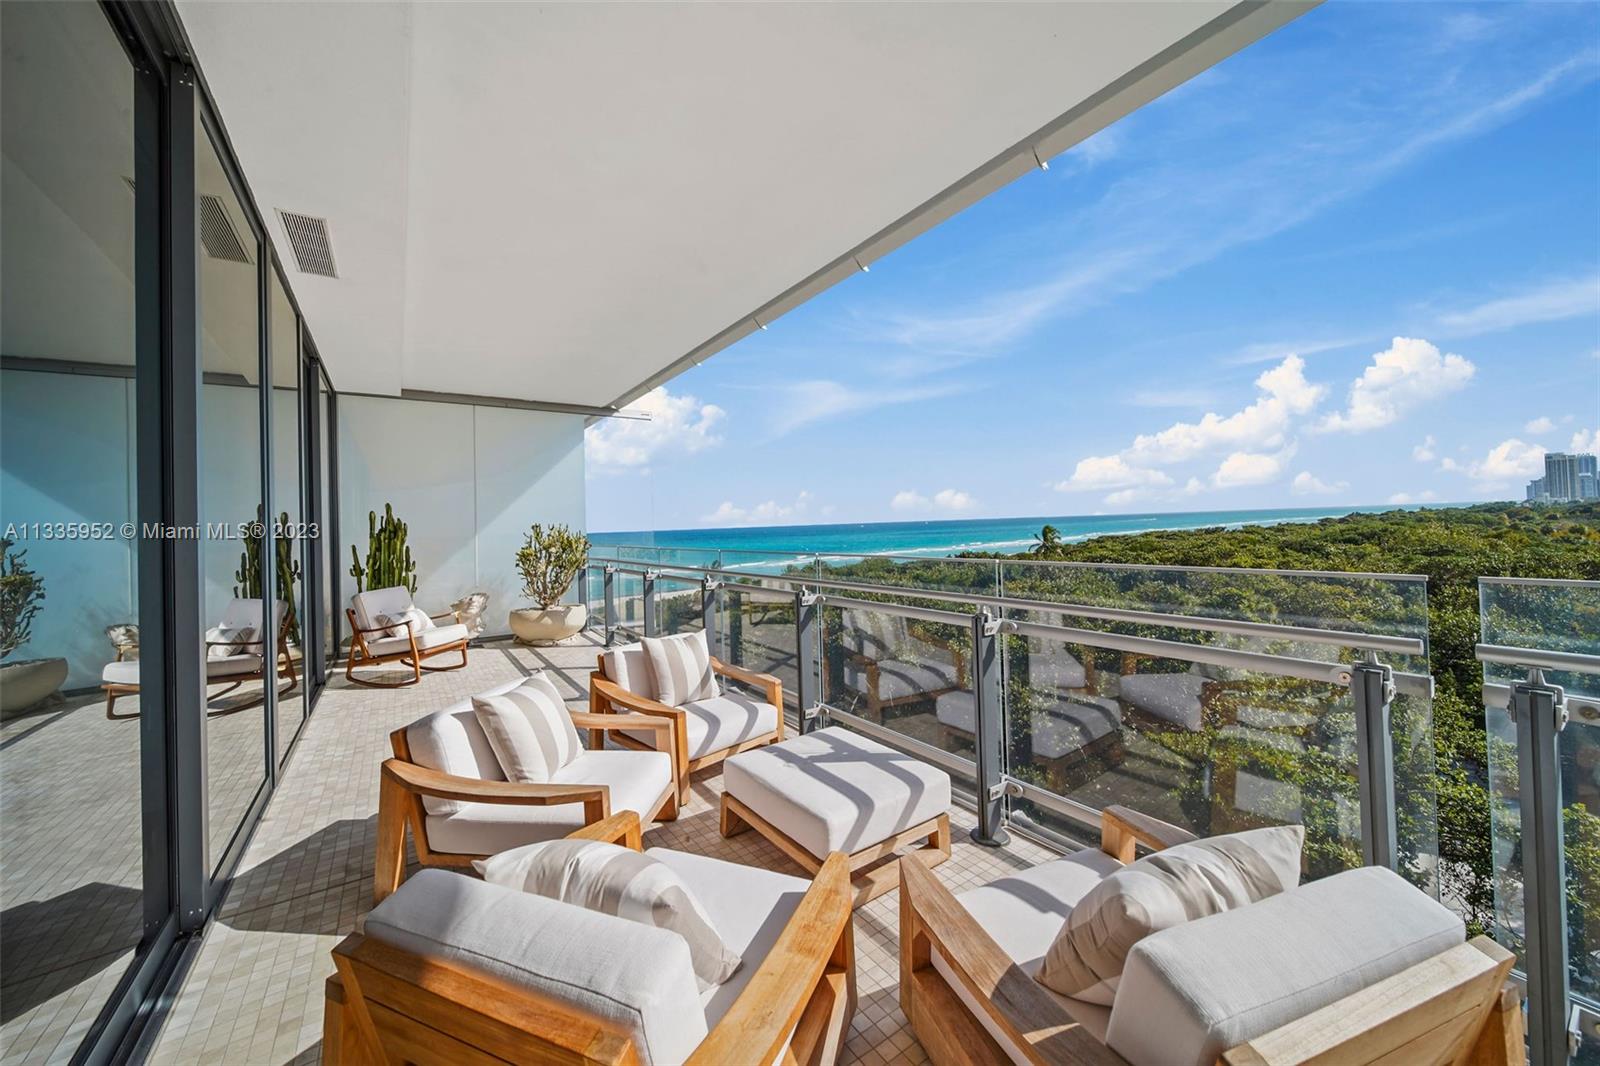 Are we on the shores of Thailand? Bali? Costa Rica? We are actually in Eighty Seven Park, where a 28-acre park embraces the ocean to give us the most unique, spectacular view in Miami! This South facing corner unit boasts a 1433 sq ft covered, wraparound terrace to encompass the ocean sunrises and city sunsets. Hovering above the park’s canopy , you will feel transported, in Renzo Piano's latest masterpiece. With a private elevator entrance, 10-foot ceilings, floor-to-ceiling glass, and stacking glass doors, you will love this seamless indoor and outdoor space. Everything is 5-star, top-of-the-line from the finest finishes, appliances, and oak floors to the grand lobby, two pools, hammam spa, and beach service. Live your best life at its finest! Ask for 3D tour